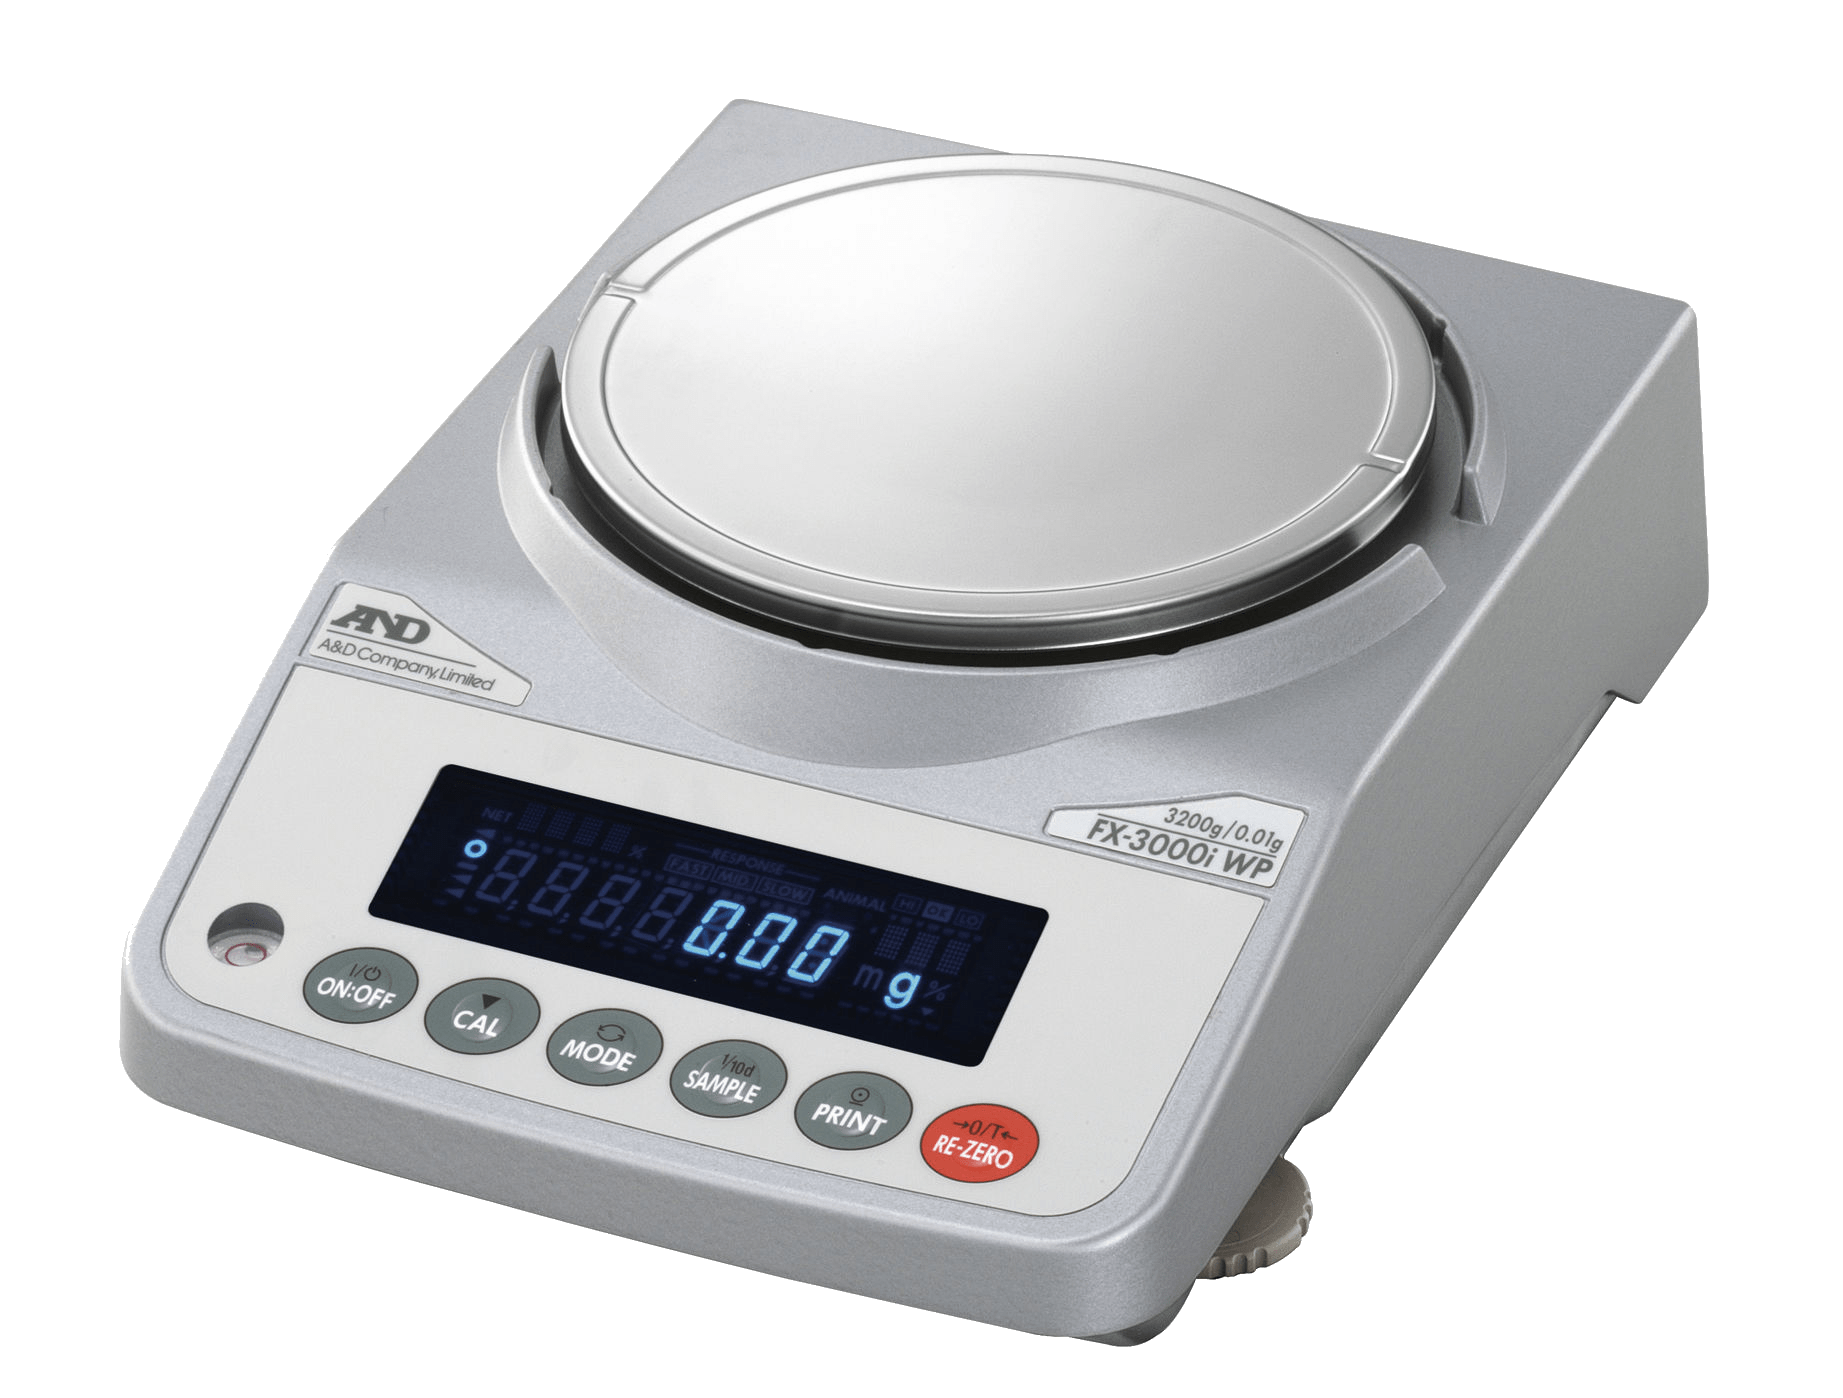 A And D FZ-3000i-WP-EC precision balance with digital display. Six raised buttons, from left to right, ON and OFF, Calibrate, Mode, Sample, Print, RE-Zero.